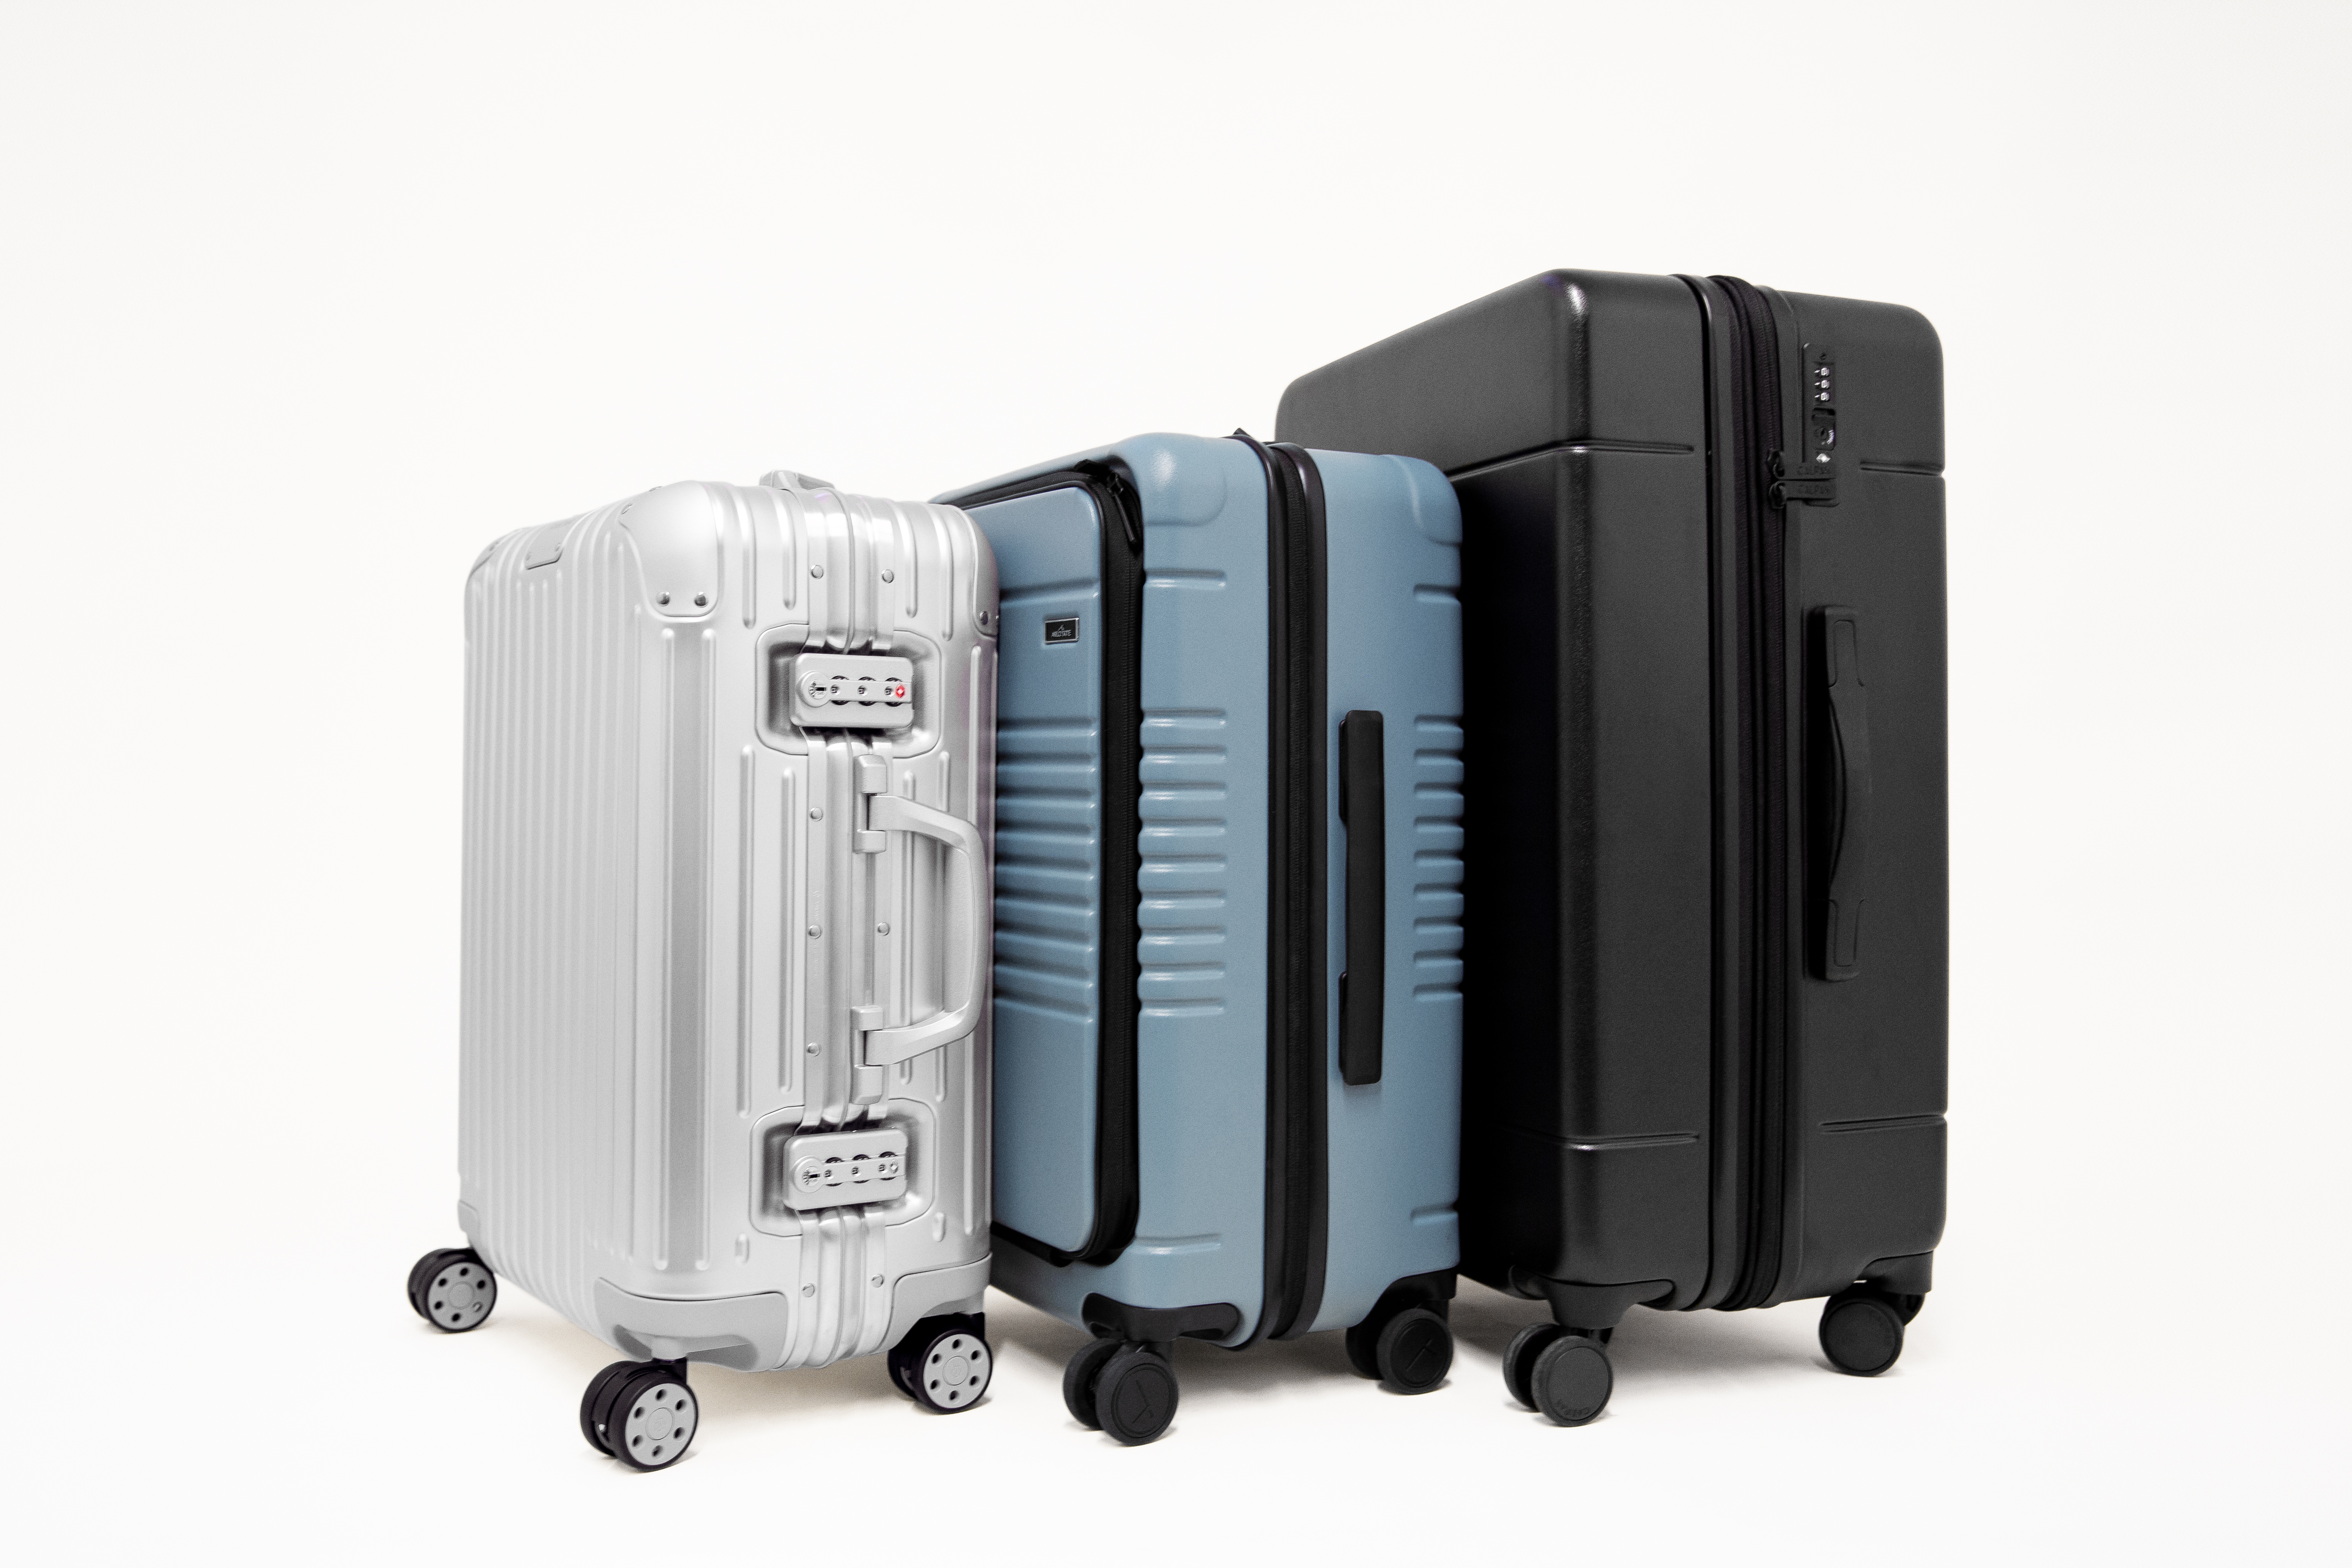 Why Rimowa decided to go shell for leather